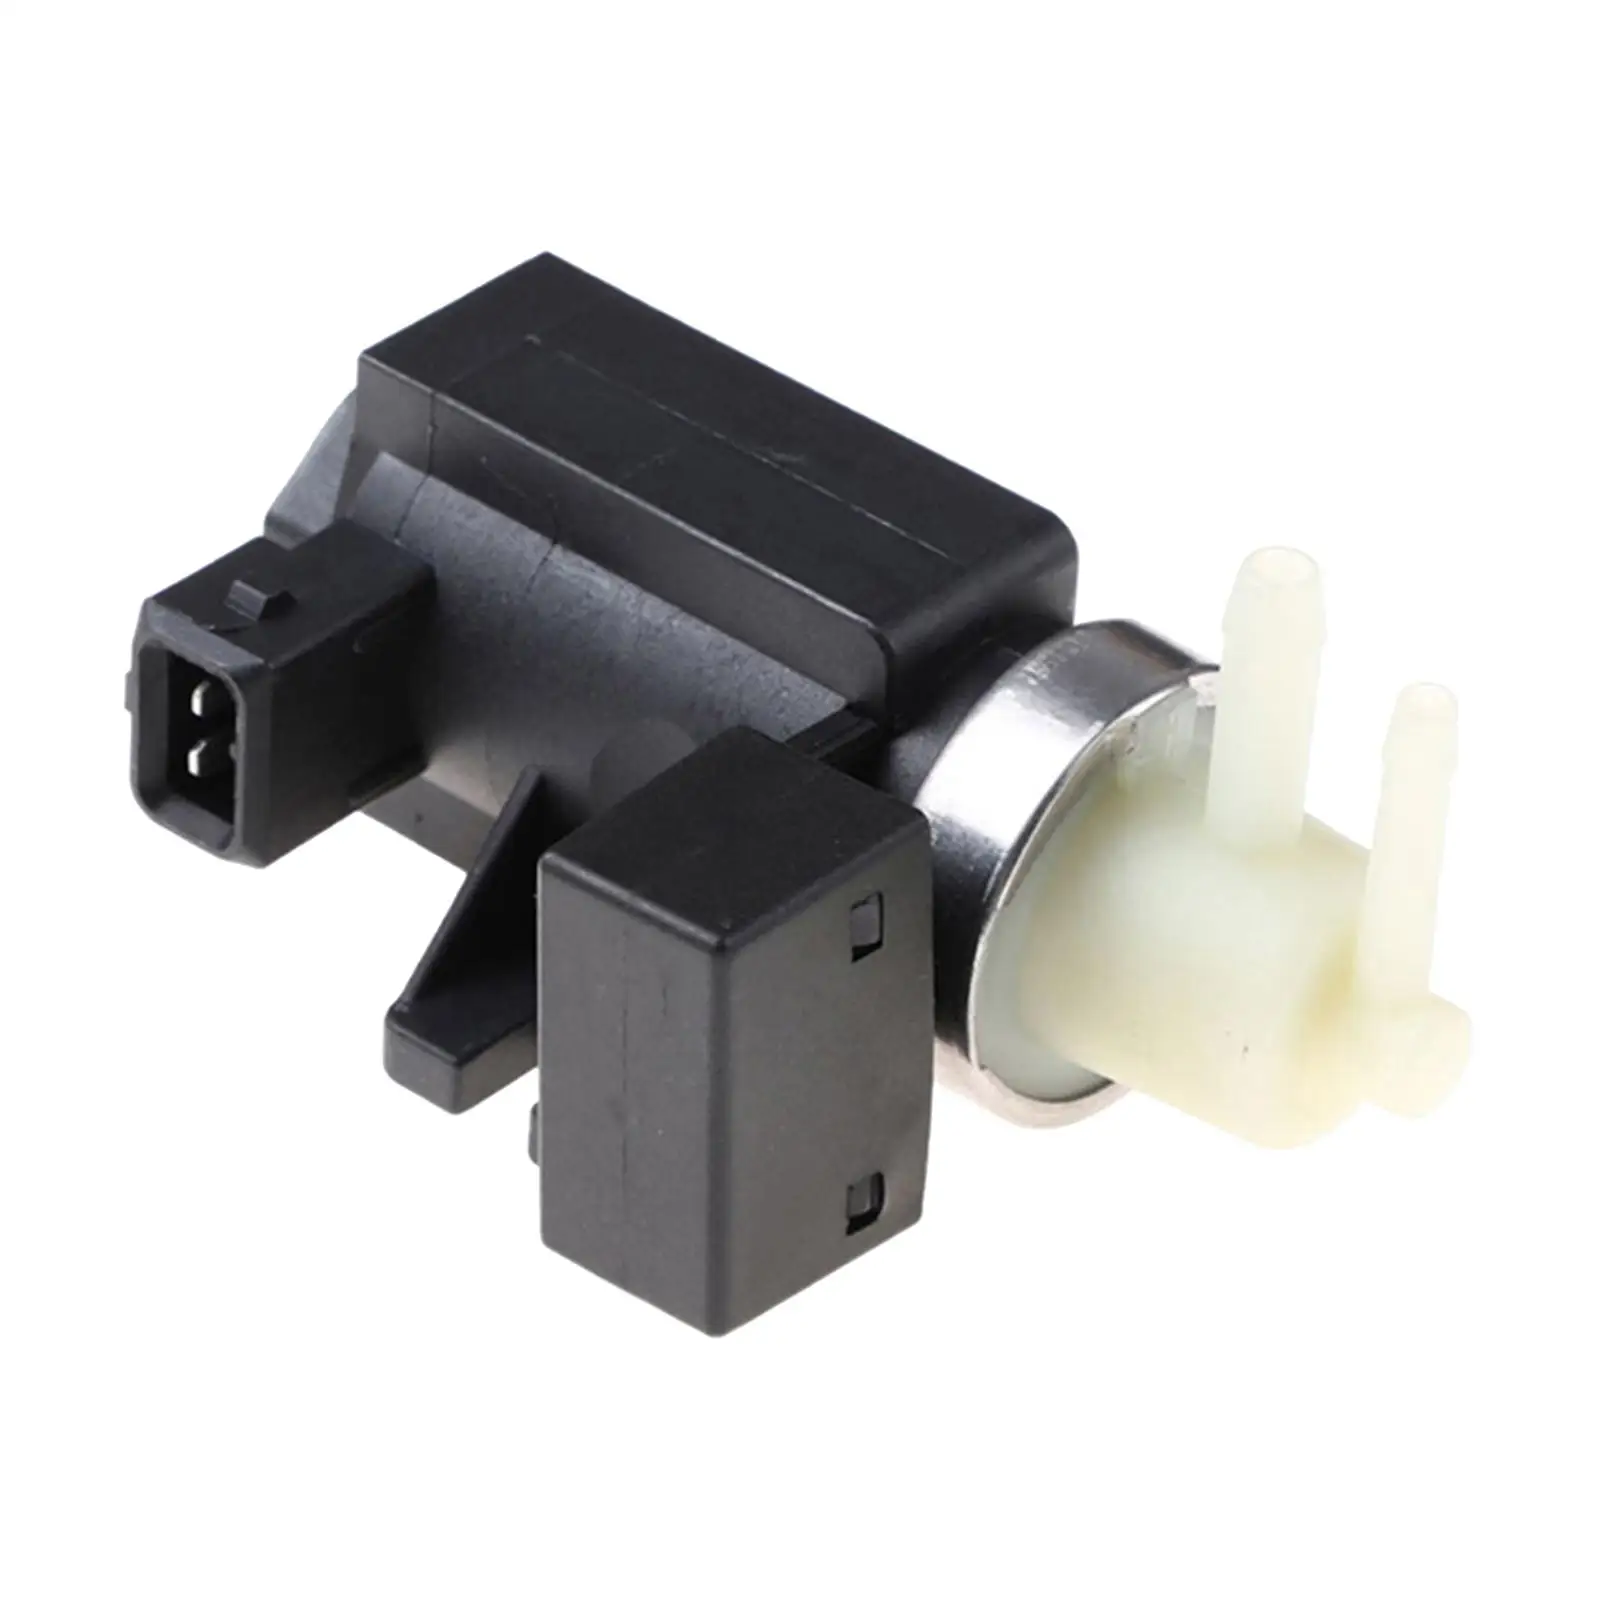 

Turbo Control Solenoid Valve Fit for Vauxhall J 2010-On 55575611 55579900